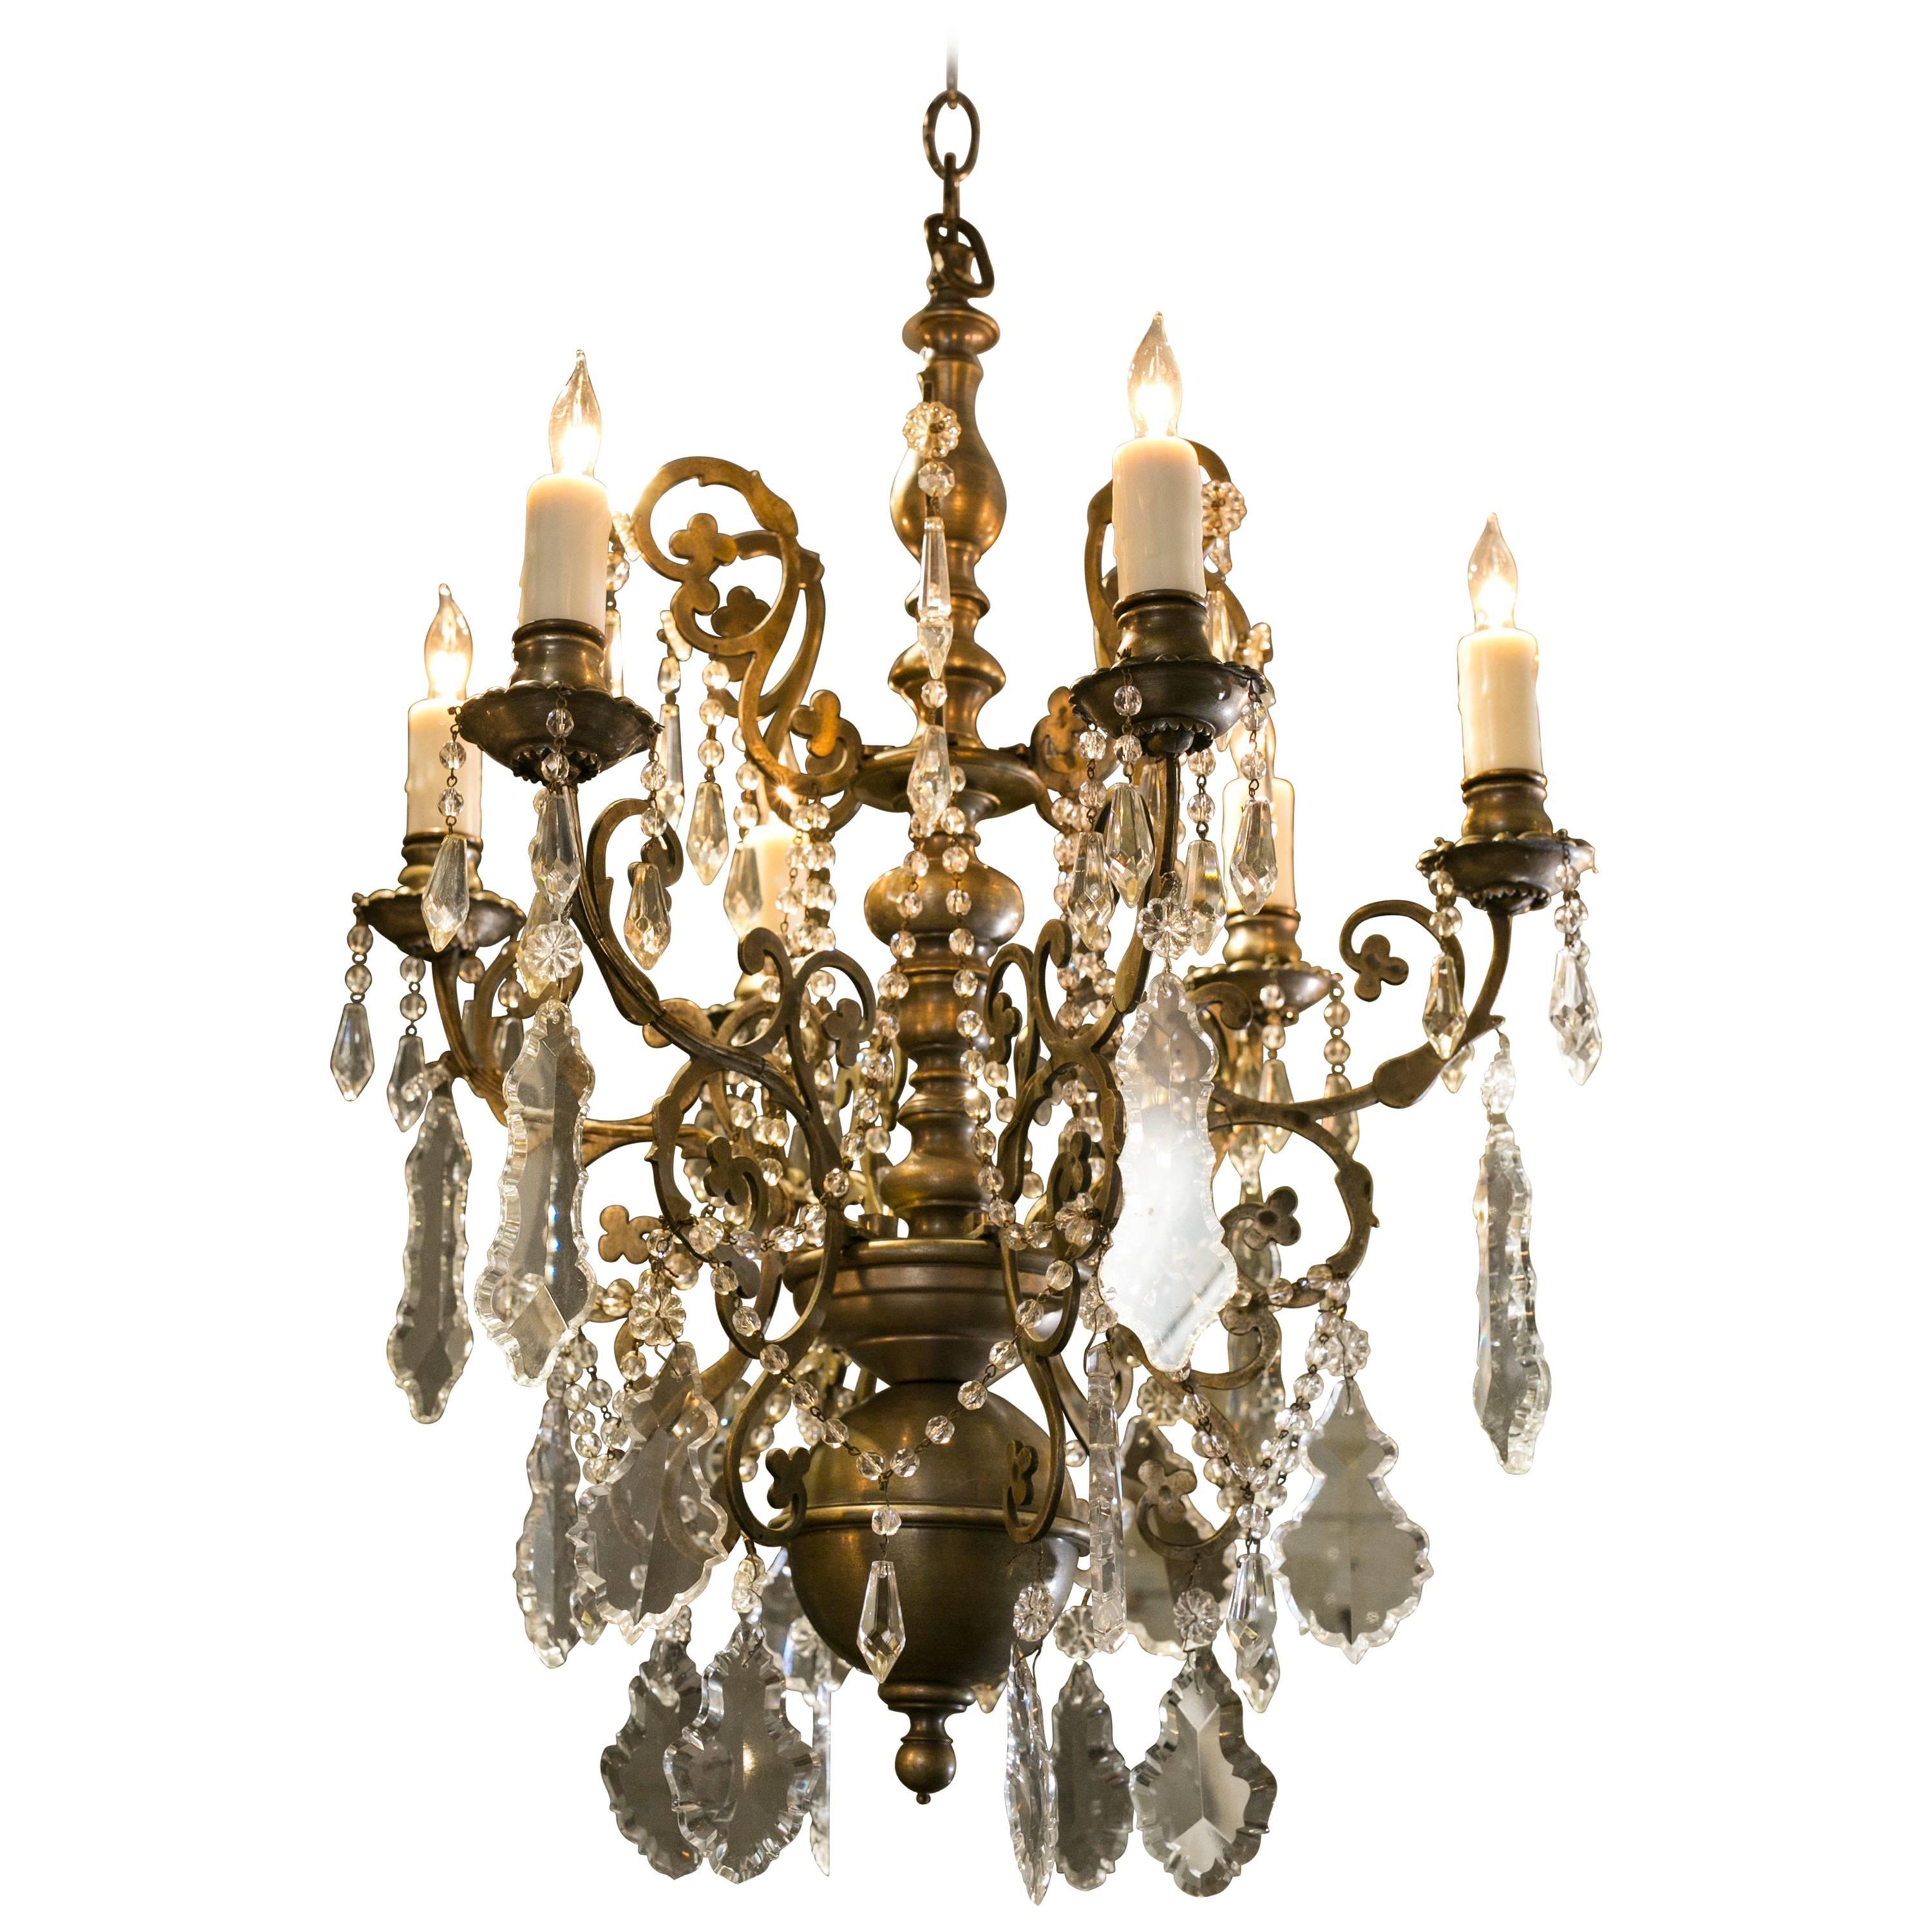 Pewter Colored Crystal Chandelier with Six Arms from Belgium, circa 1930